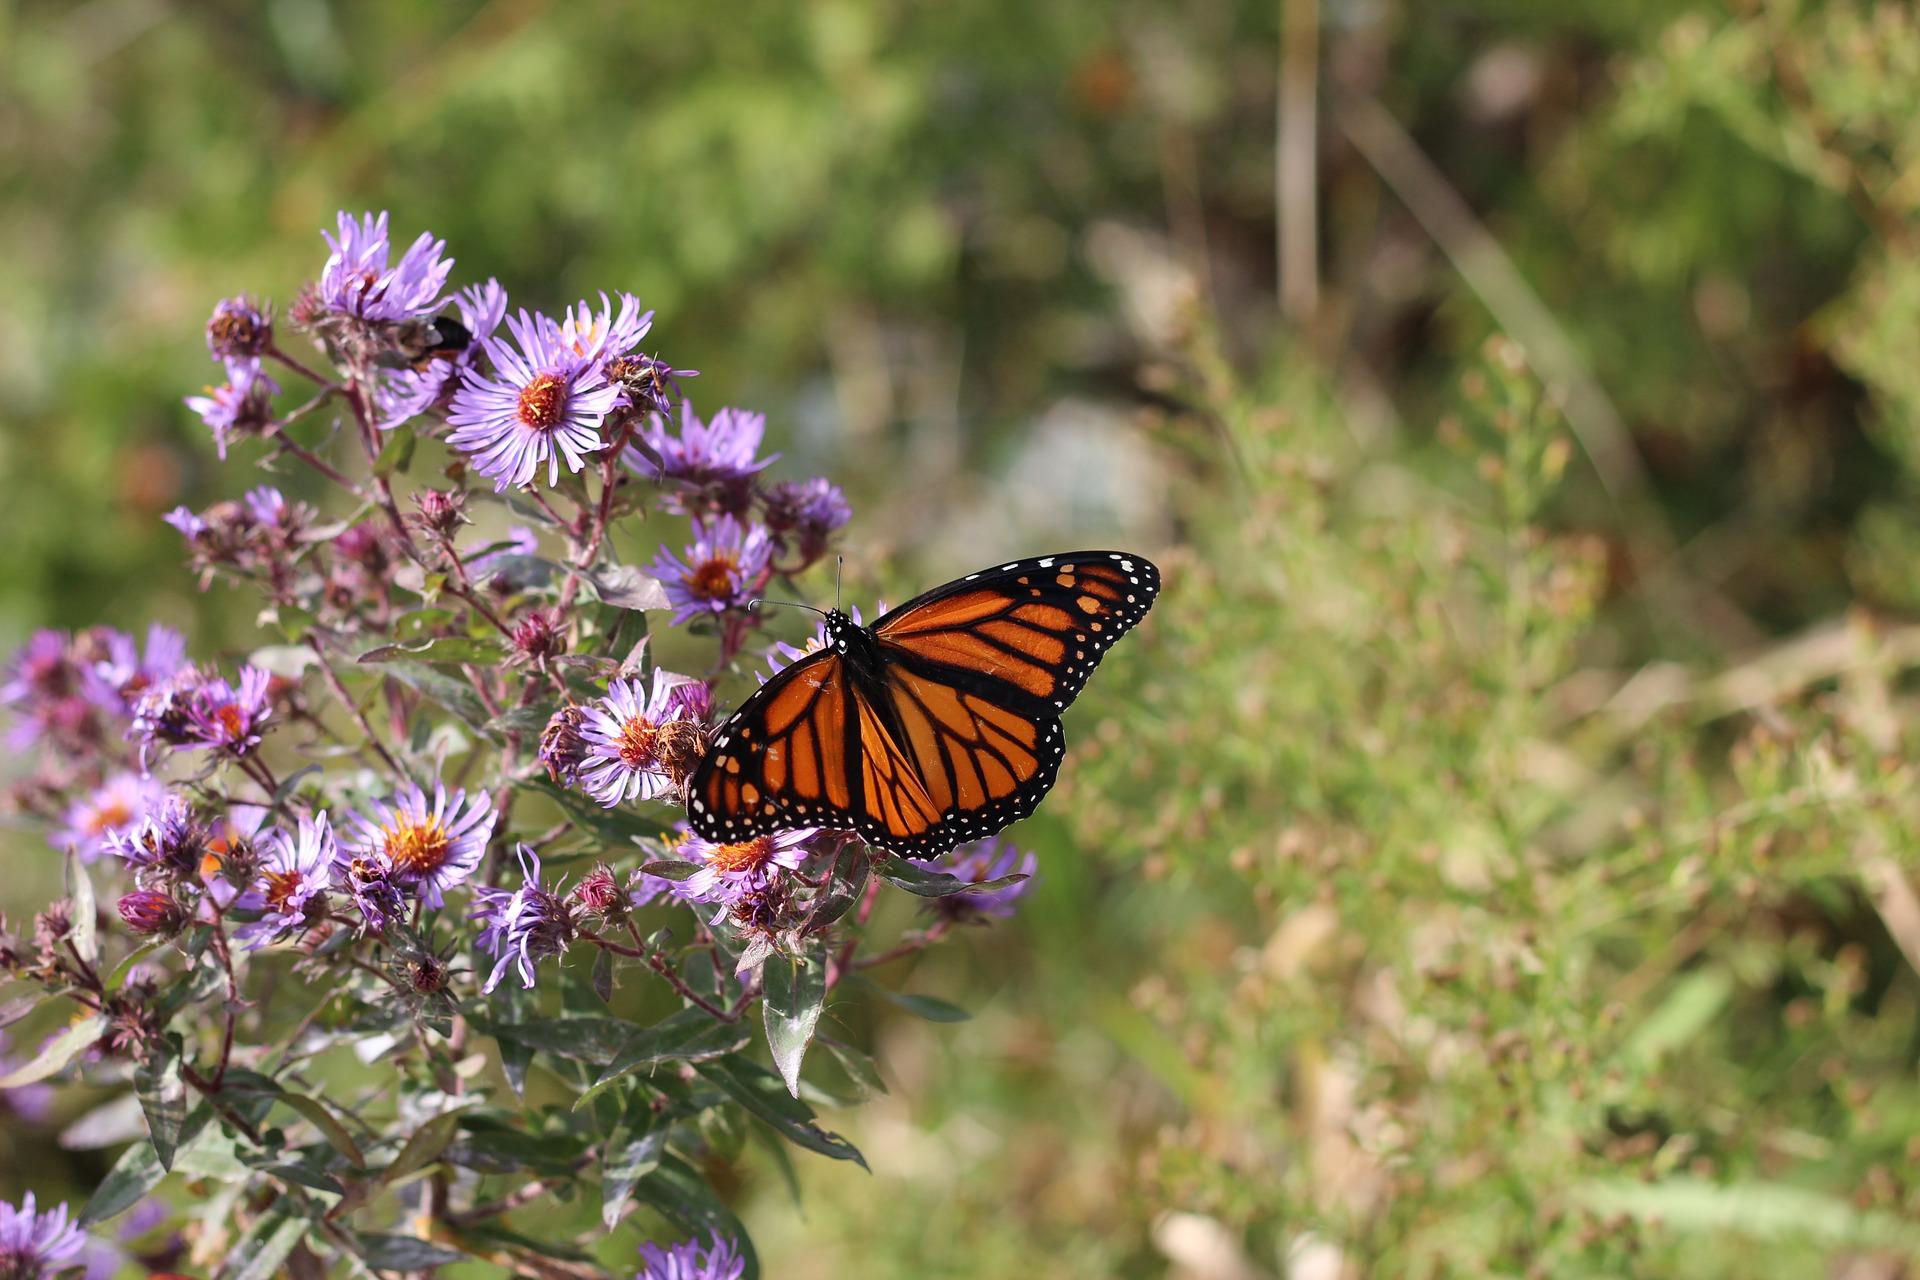 purple aster flowers and a monarch butterfly